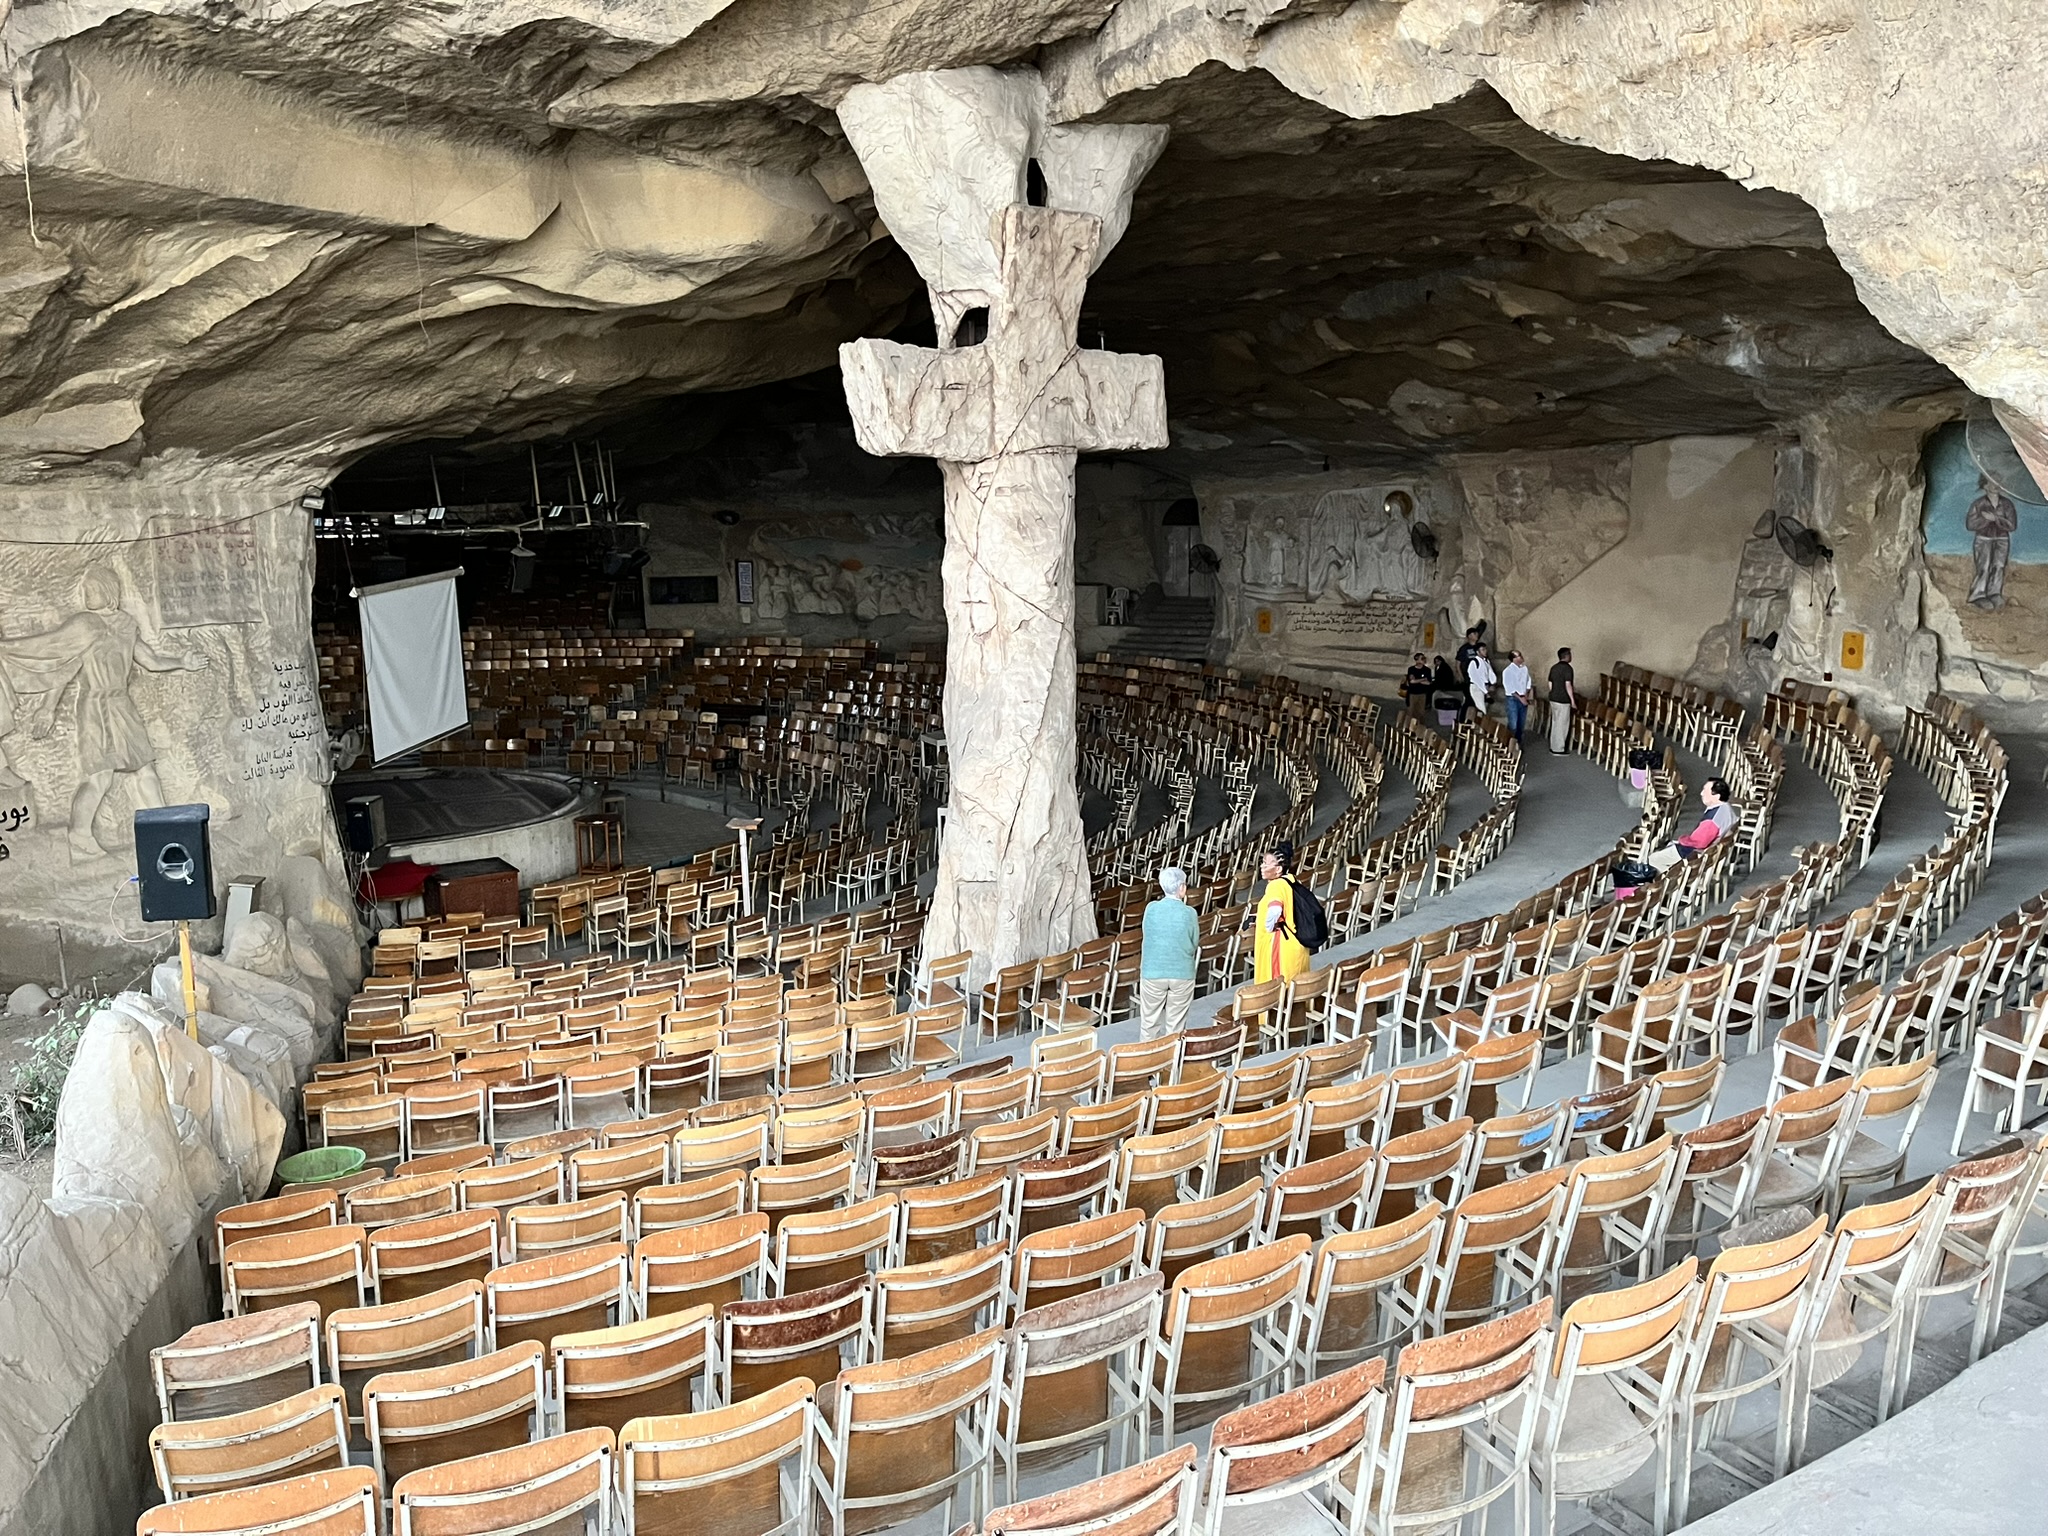 A church amphitheatre within a cave with a carved cross on a supporting pillar.